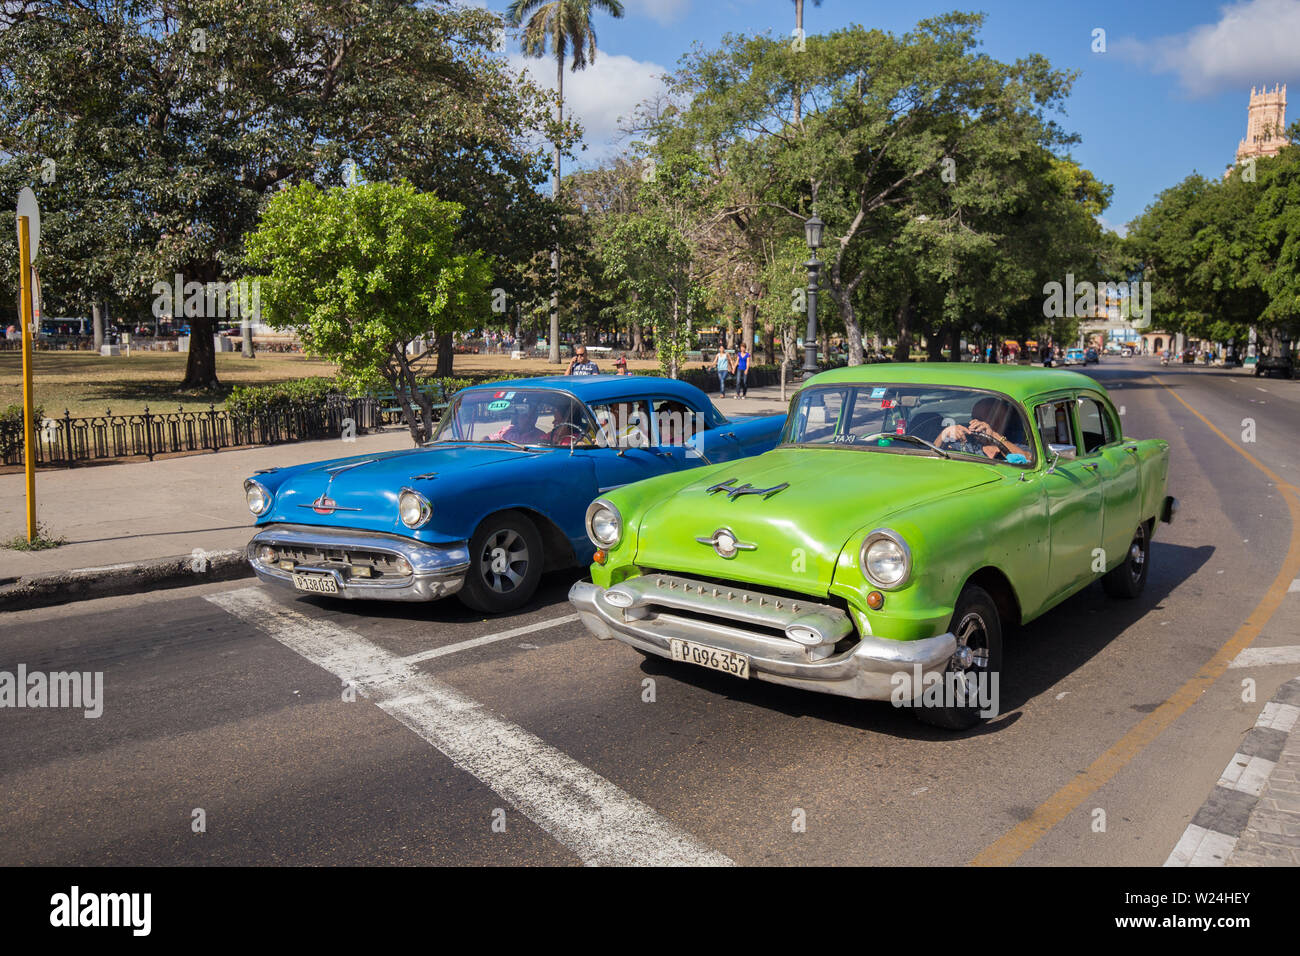 Republic of Cuba. Country in the Caribbean. Freedom Island. Stock Photo